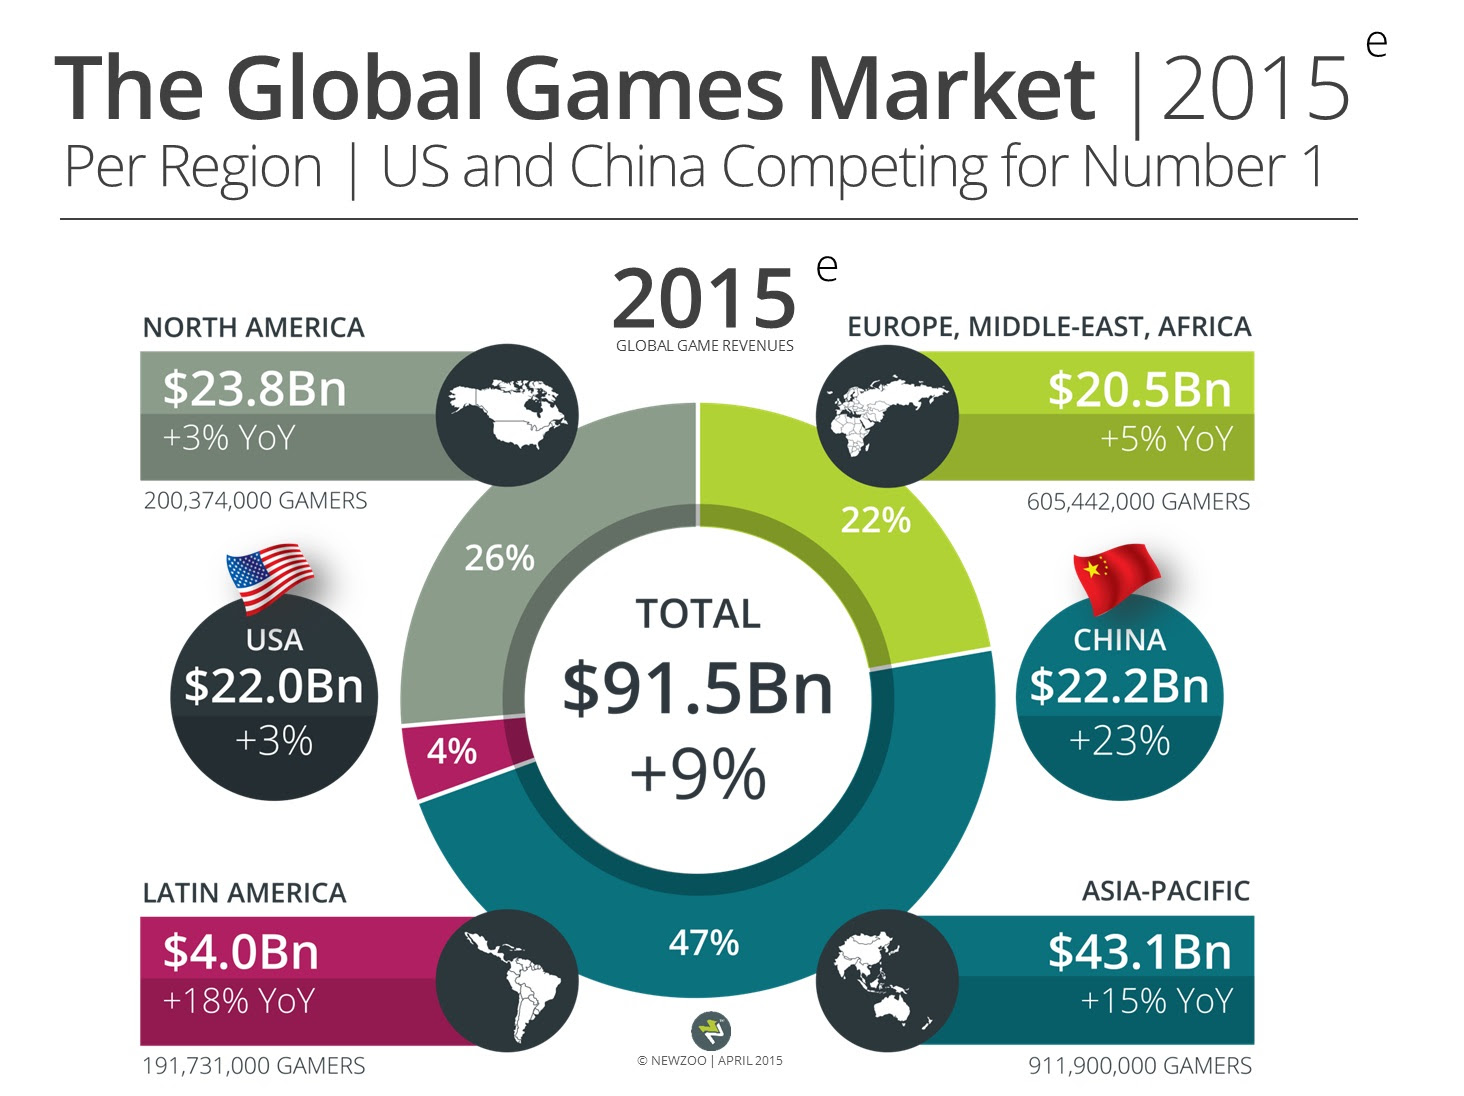  From http://www.gamesindustry.biz/articles/2015-04-22-gaming-will-hit-usd91-5-billion-this-year-newzoo 